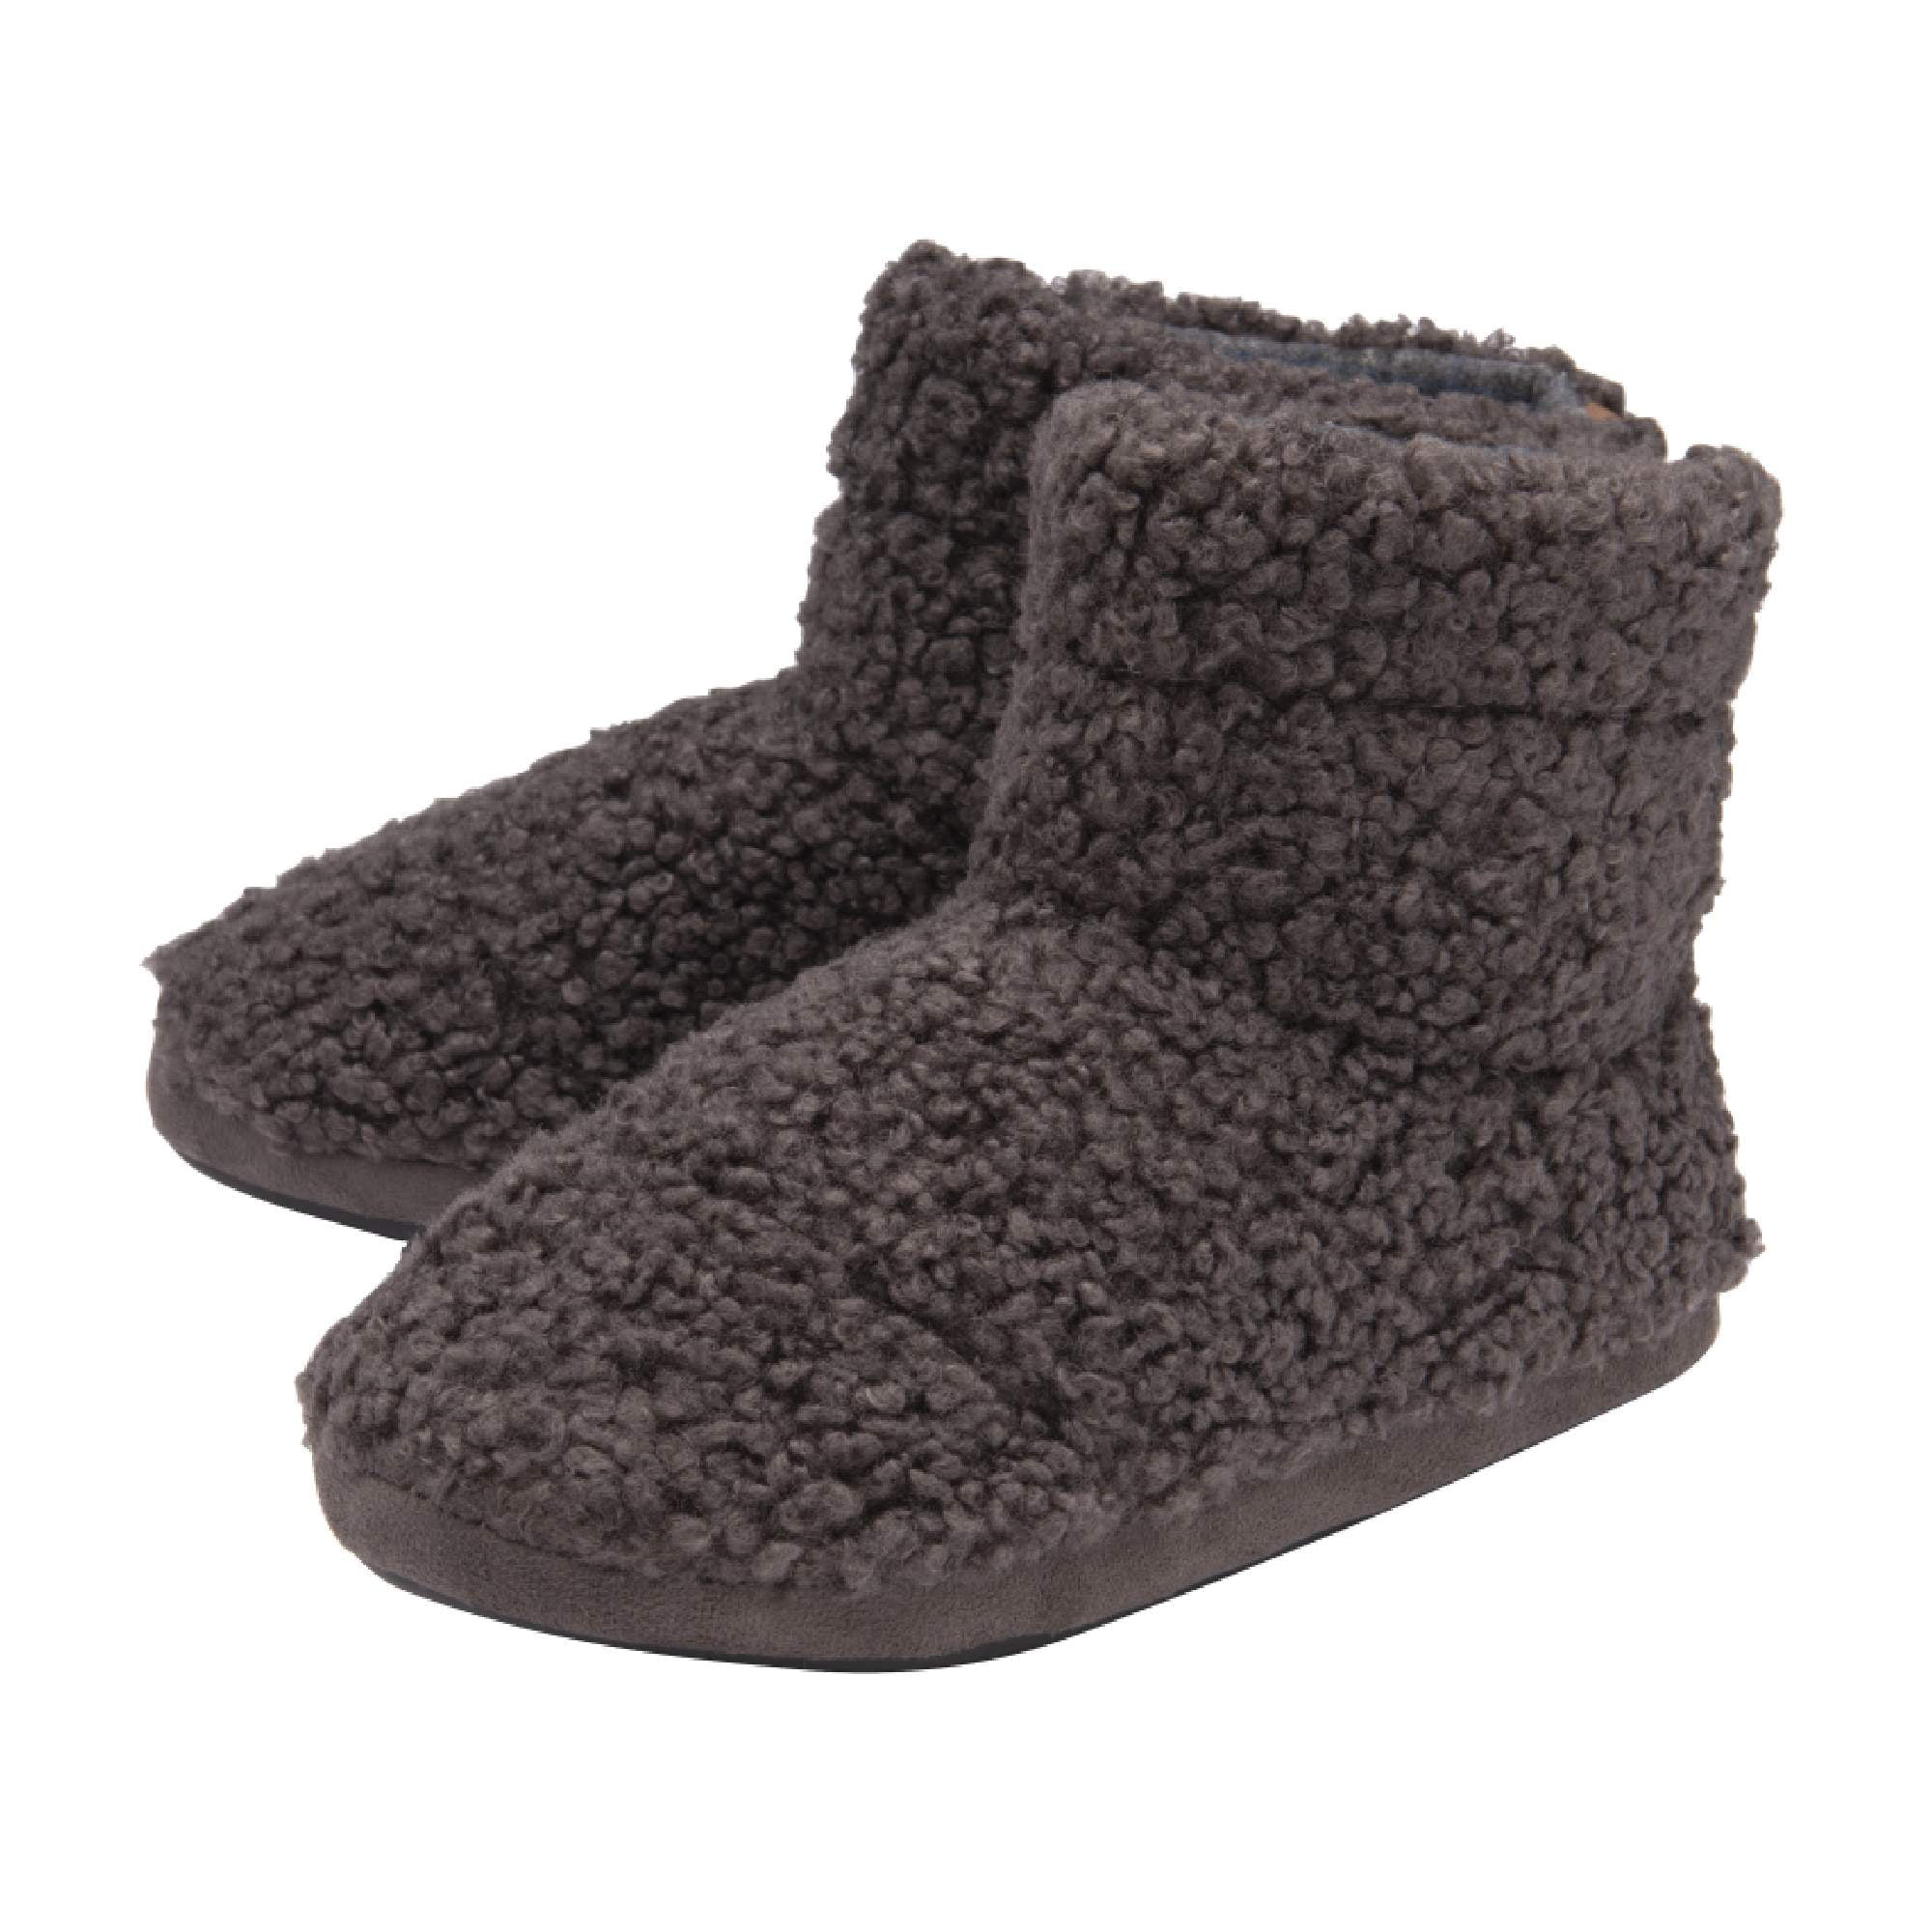 Dunlop - Mens Furry Sherpa Slipper Boots with Memory Foam Sole | Ankle ...